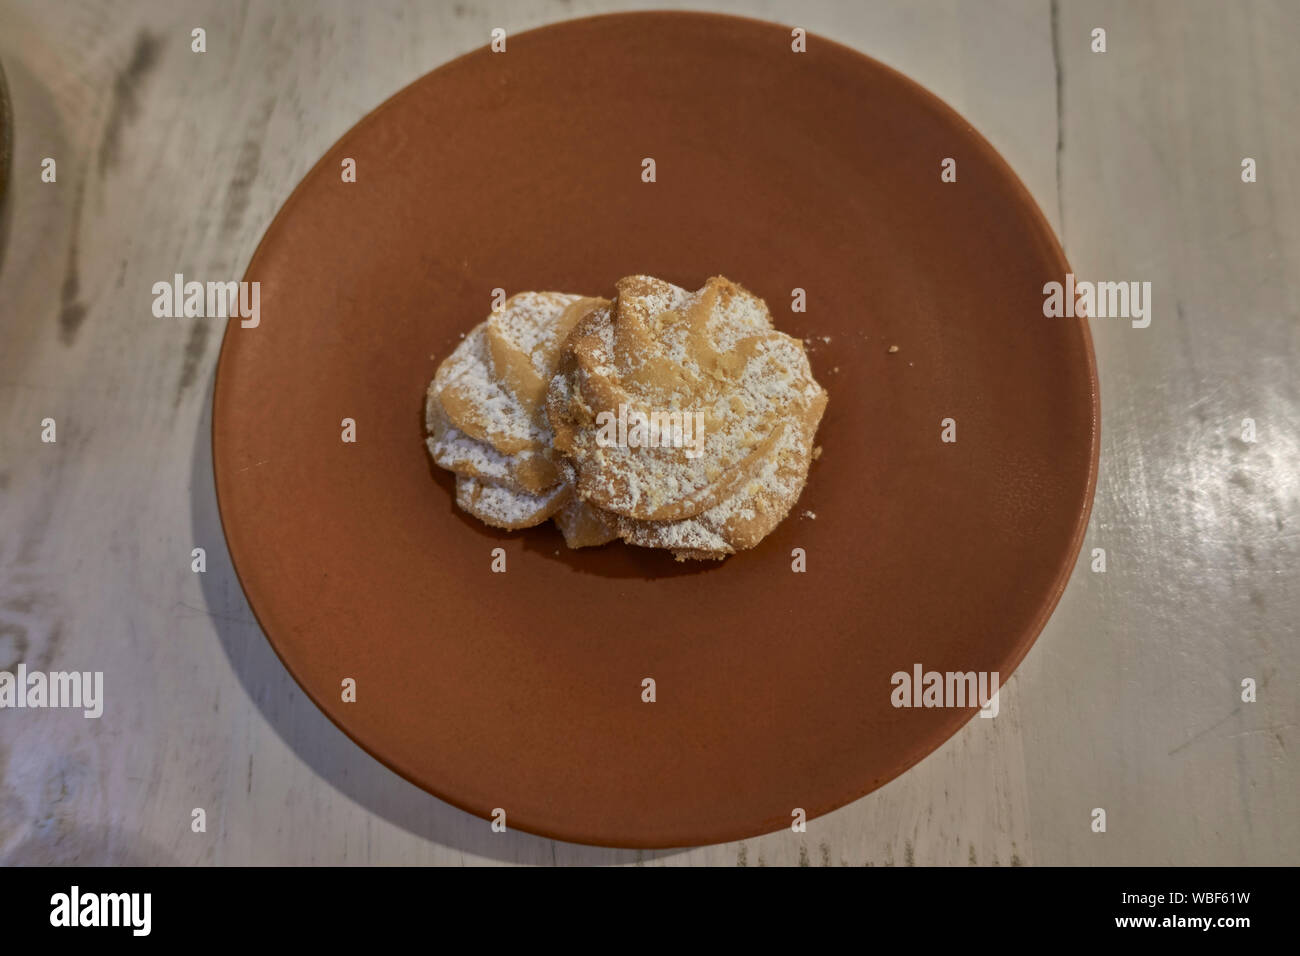 Viennese Whirl biscuits with sprinkled sugar coating on a plate served as a complement to coffee drink Stock Photo